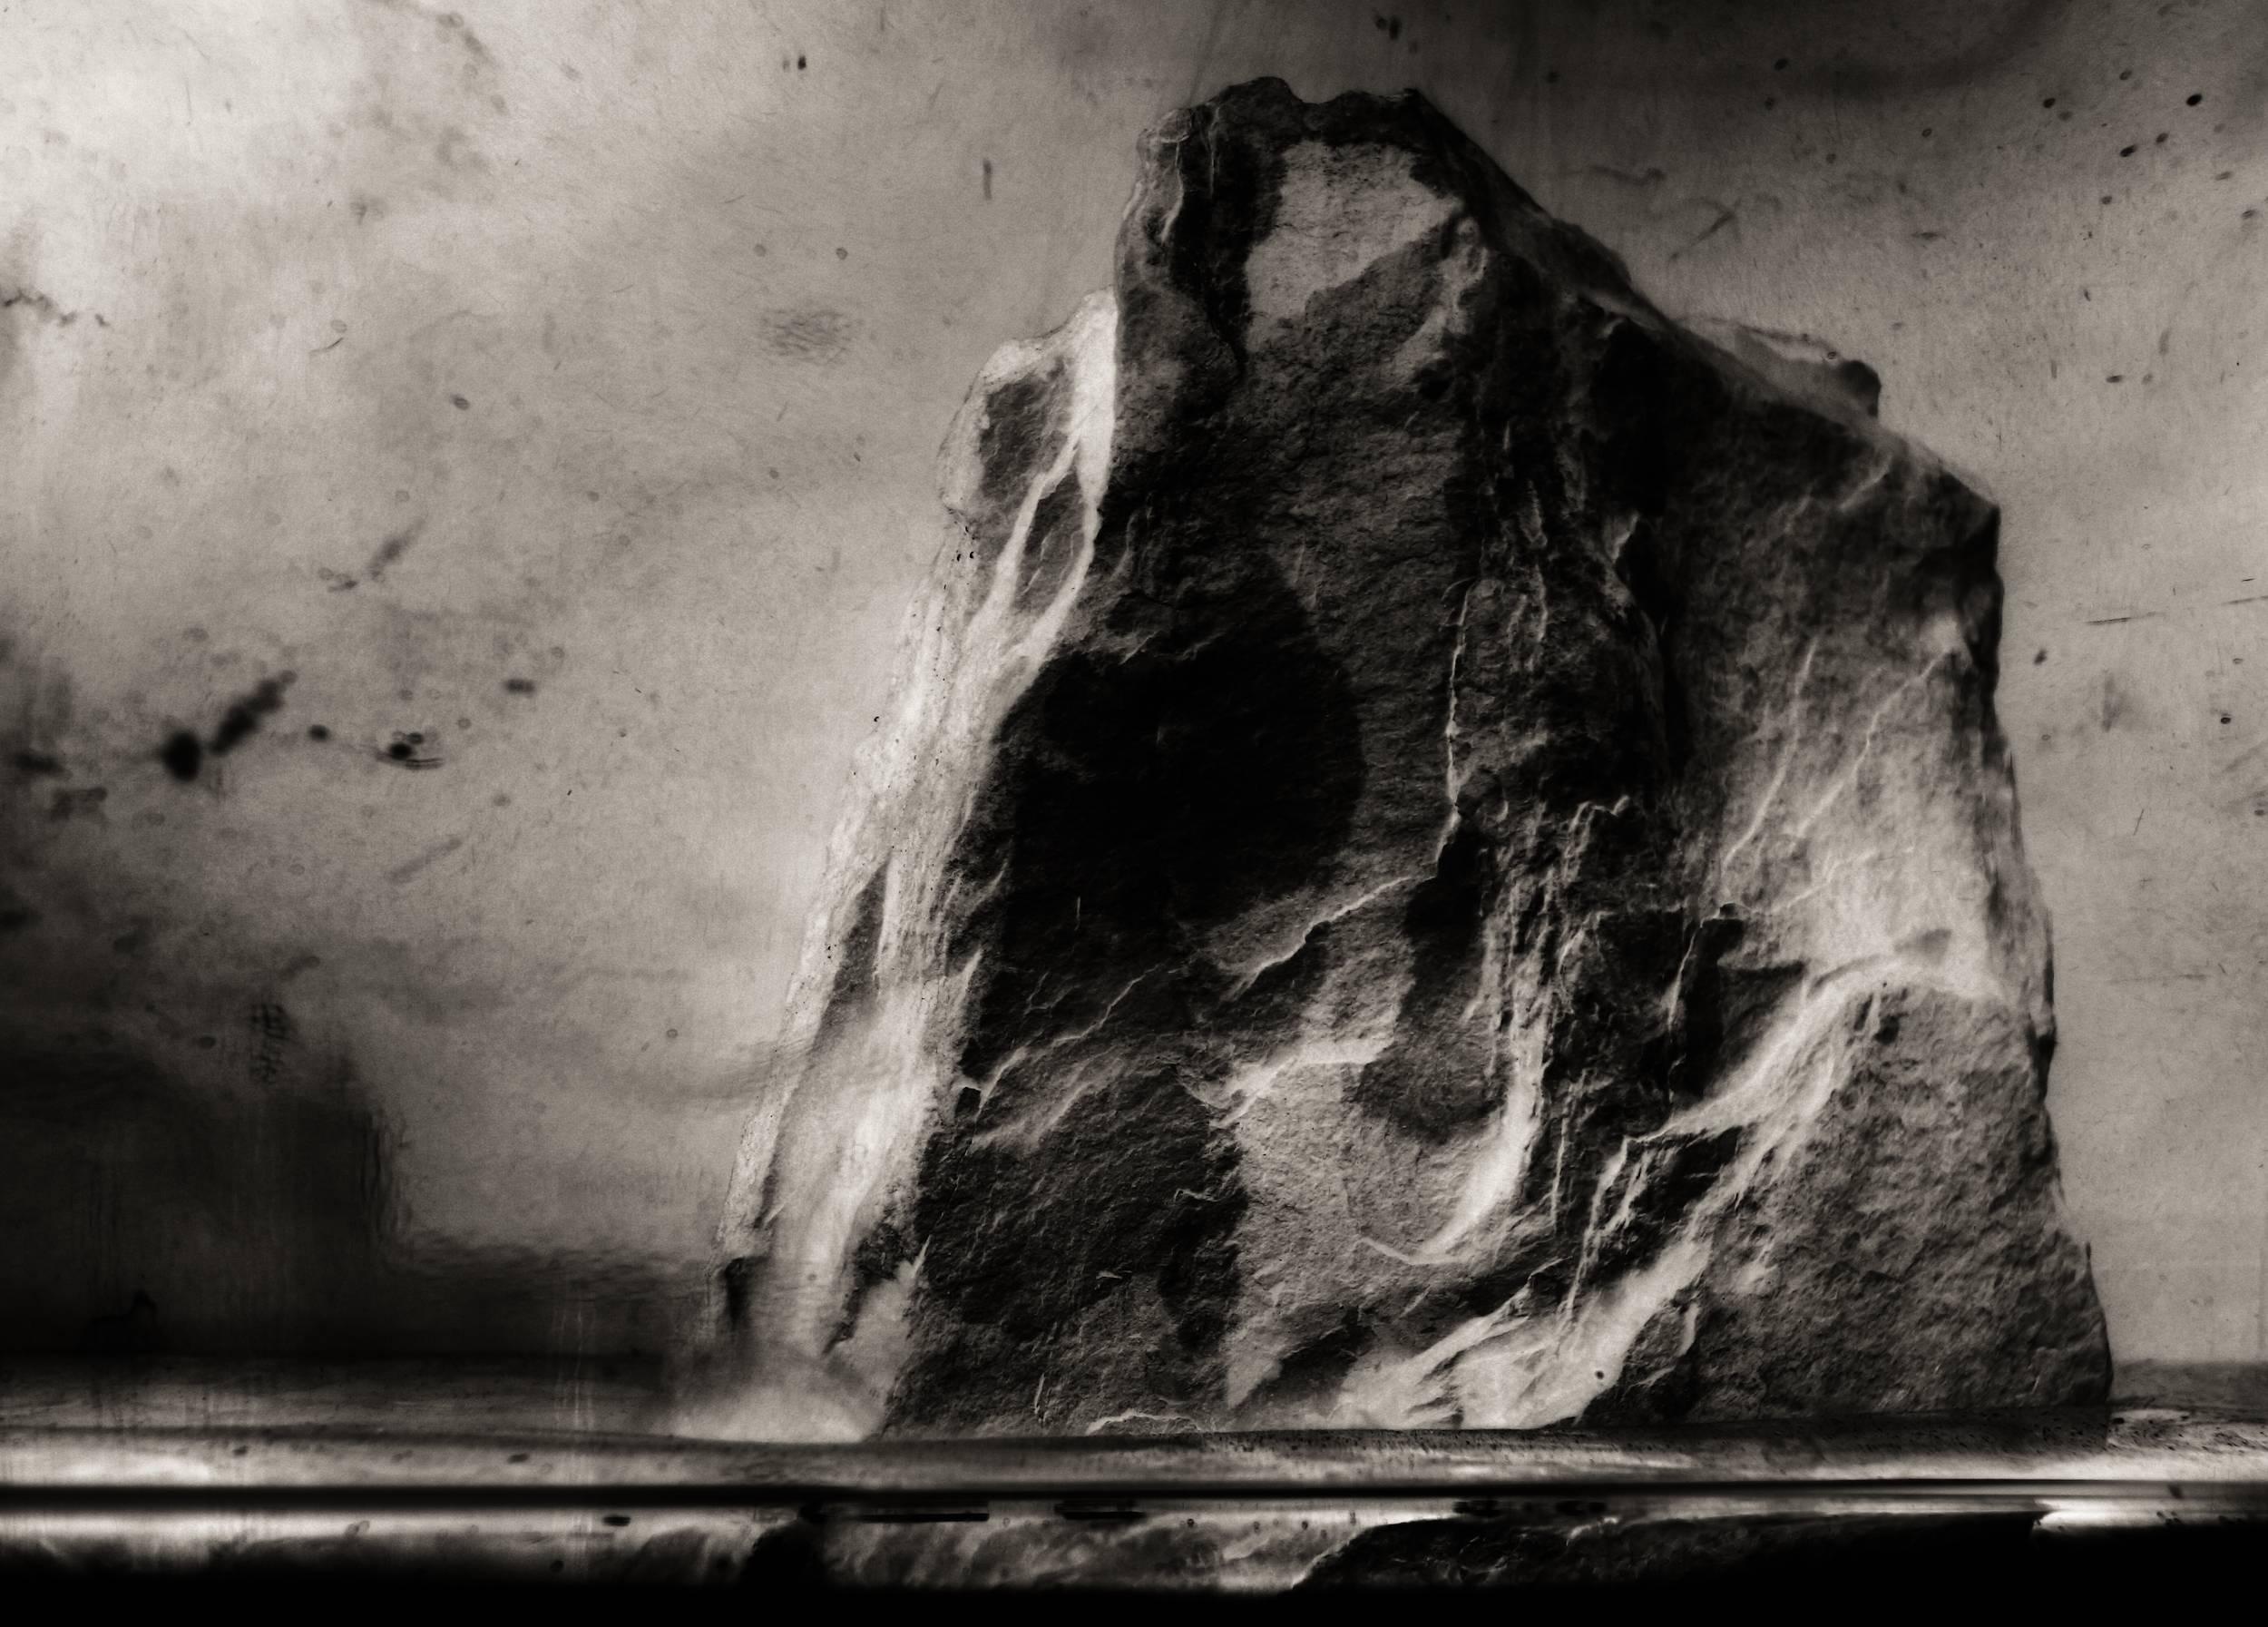 Michael Jackson Still-Life Photograph - The Western Face of Friend's Mount, 2016